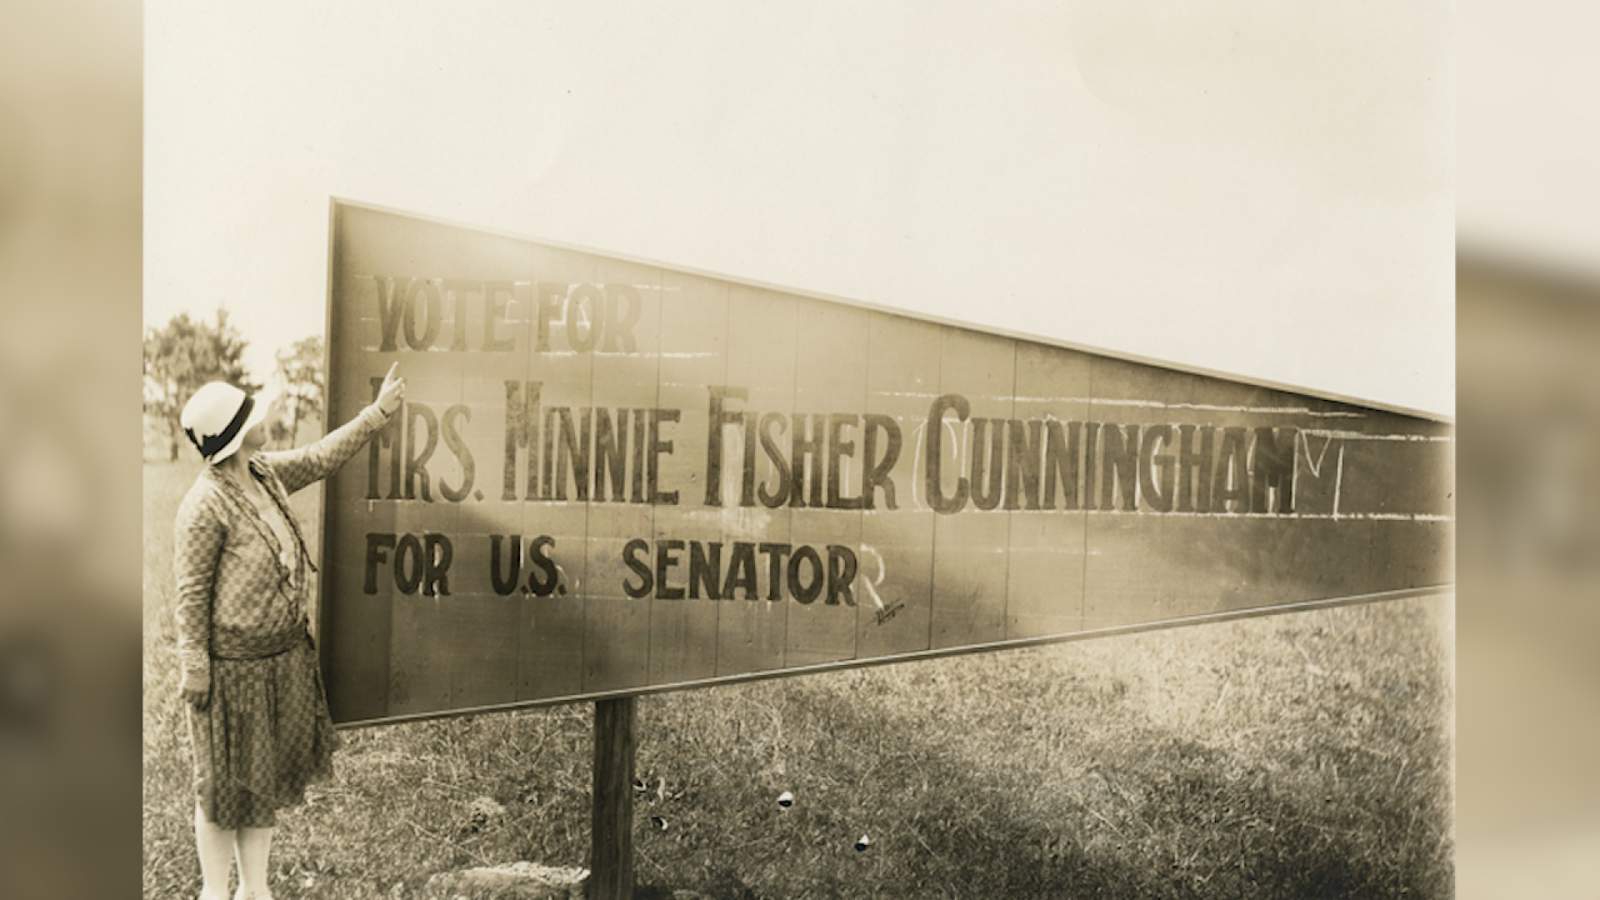 100 years after the 19th Amendment: Minnie Fisher Cunningham